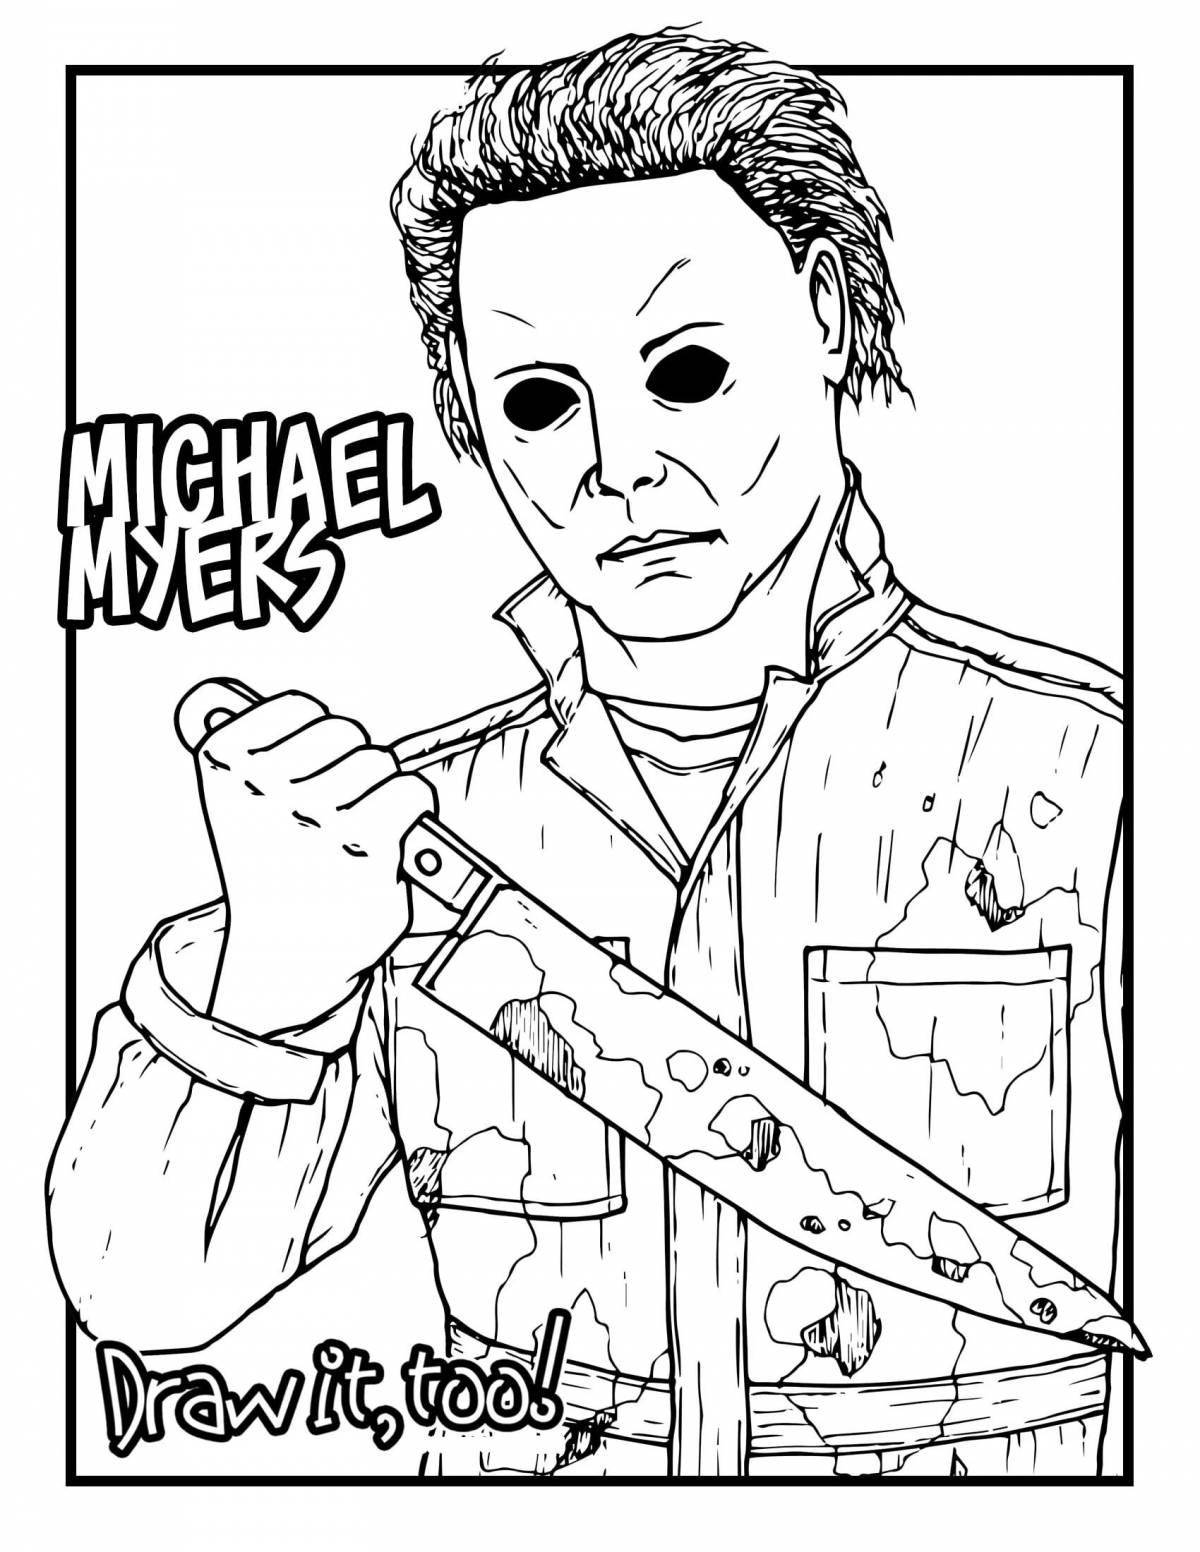 Michael Myers grotesque coloring book